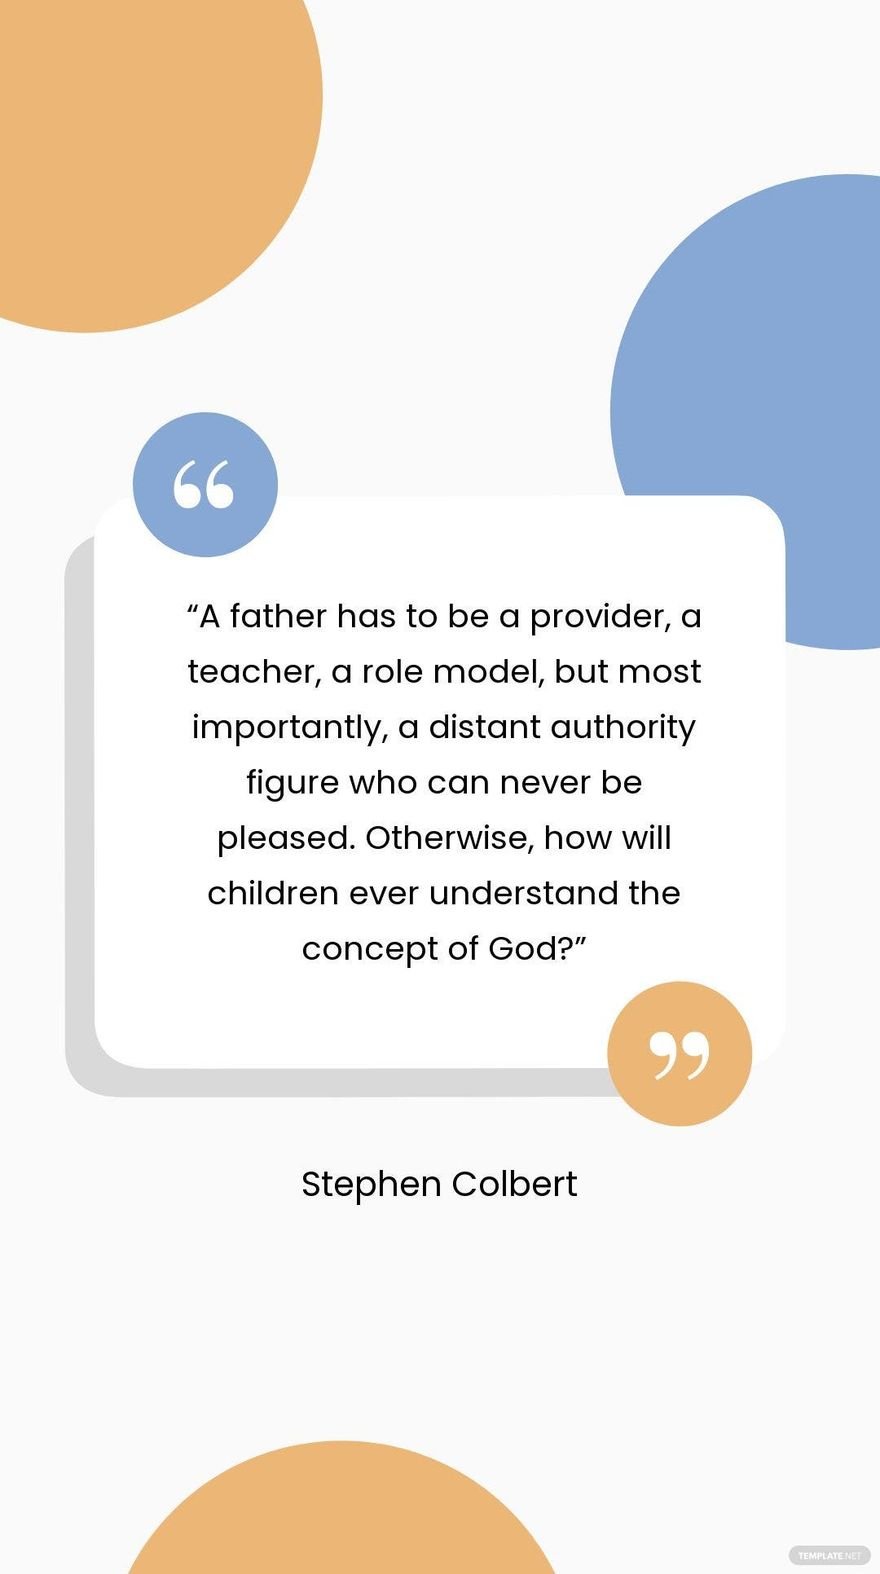 Stephen Colbert - A father has to be a provider, a teacher, a role model, but most importantly, a distant authority figure who can never be pleased. Otherwise, how will children ever understand the c in JPG